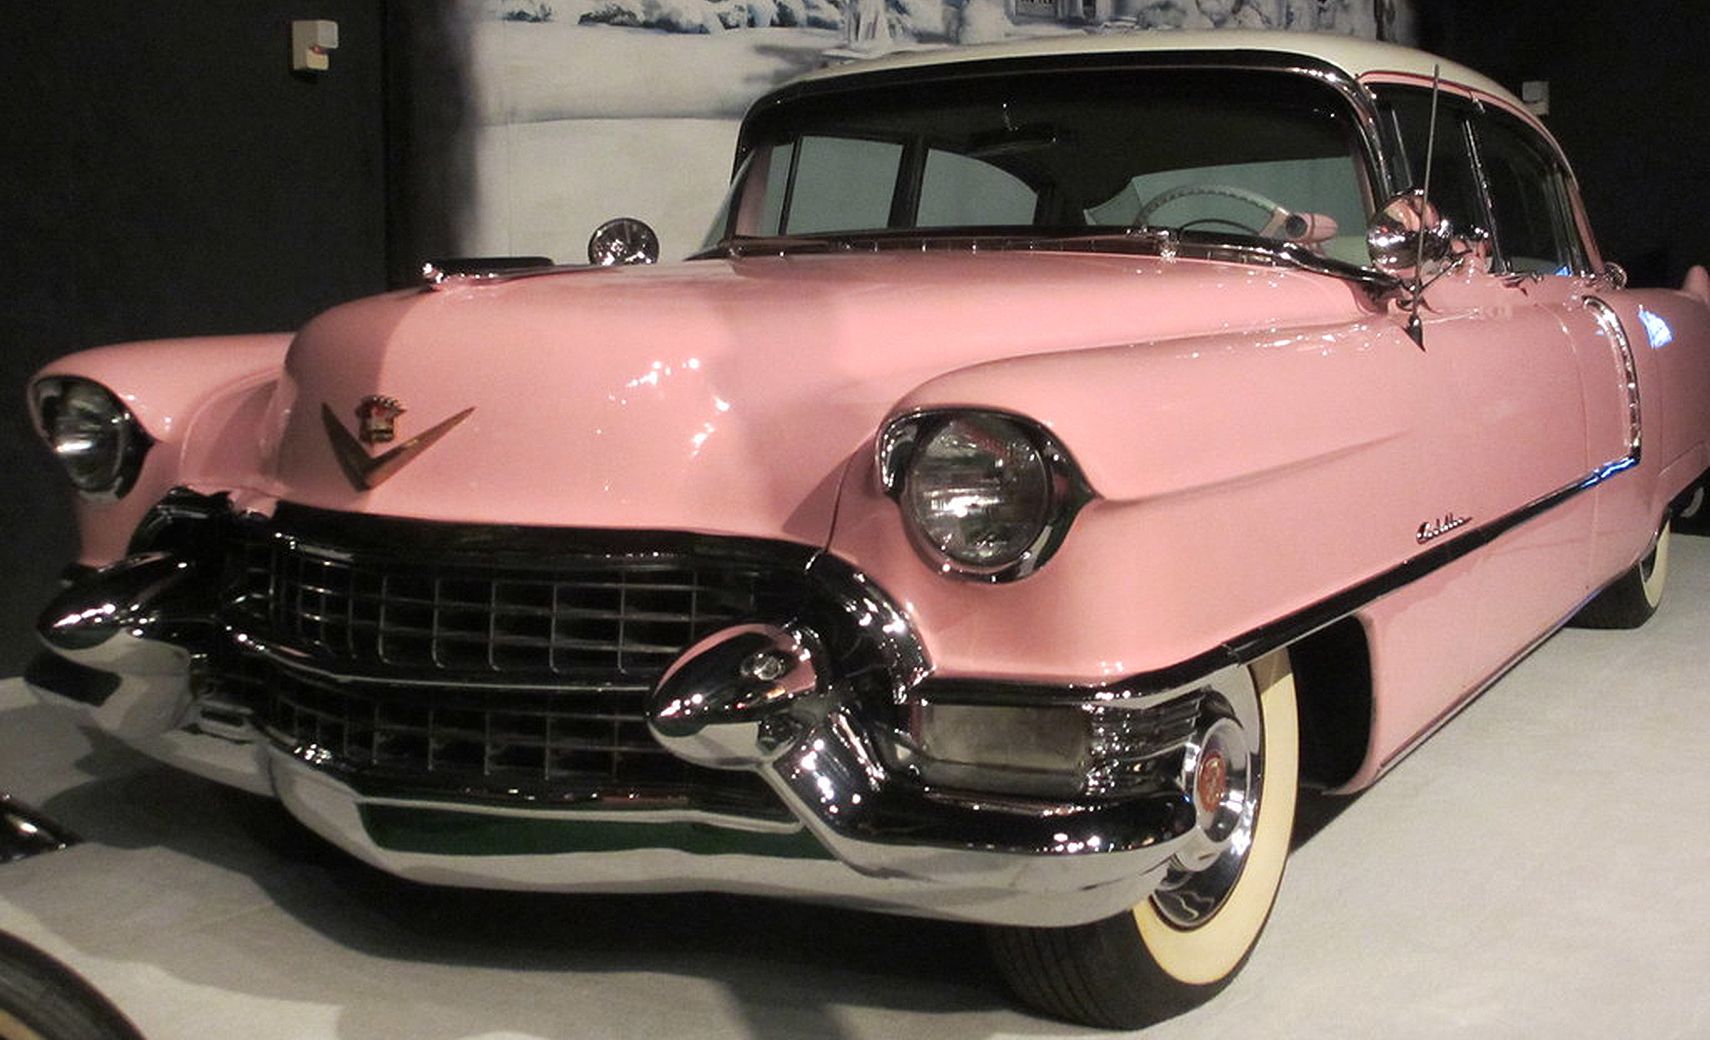 1955 Cadillac Fleetwood Series 60: The Second One